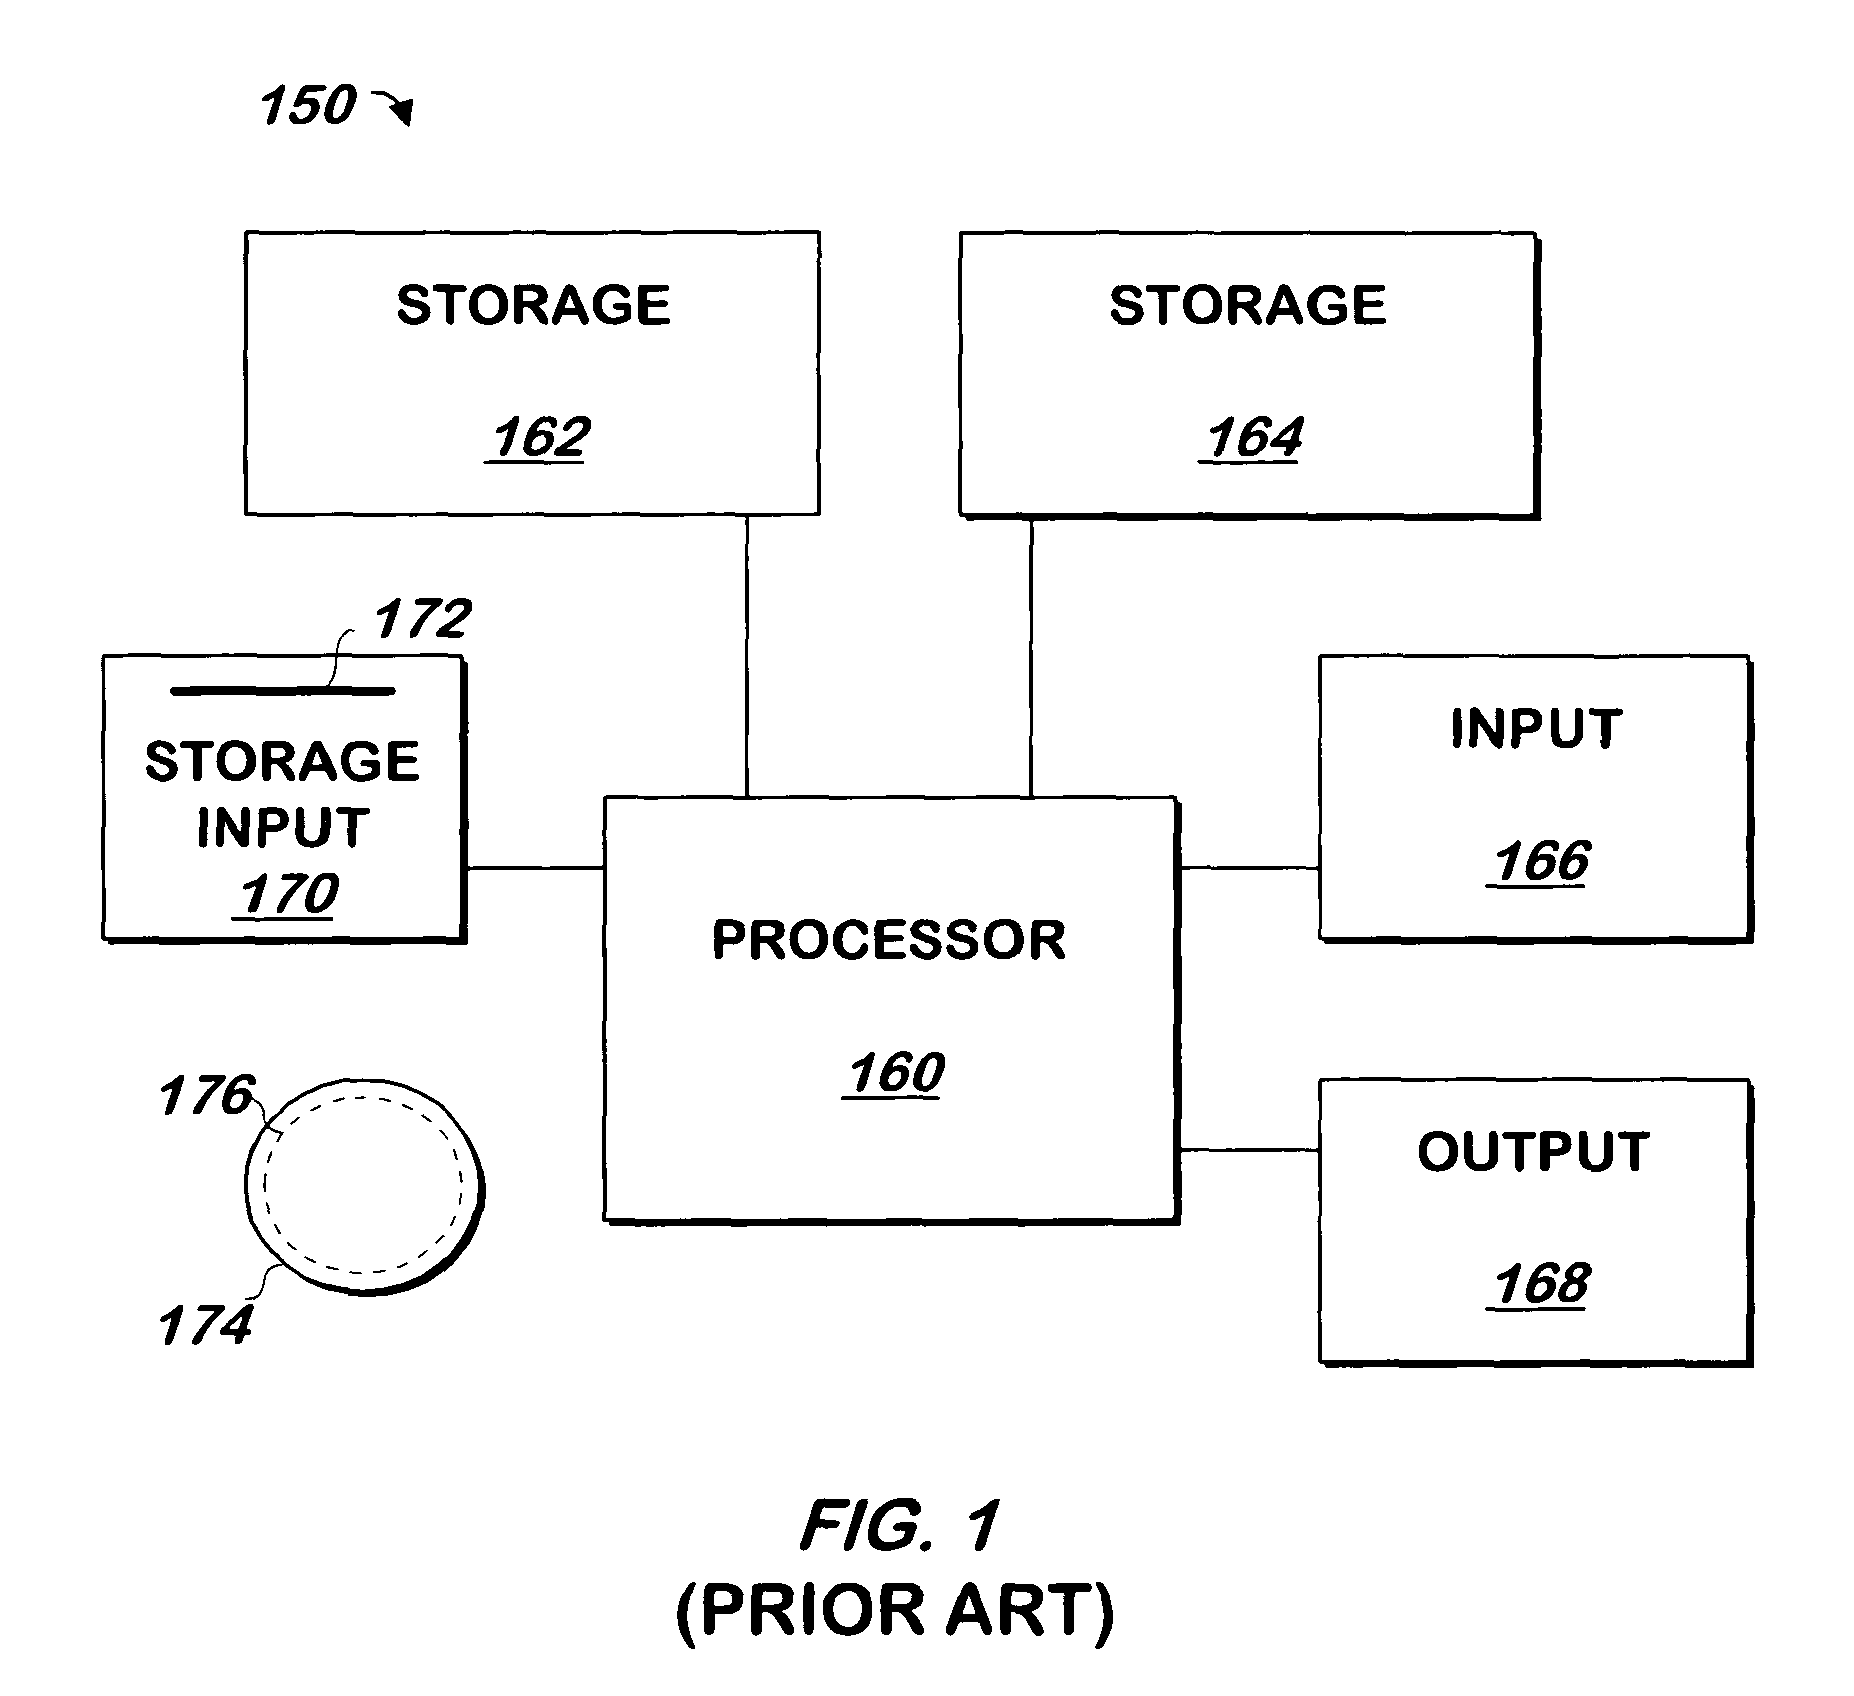 System and method for collecting statistics related to software usage